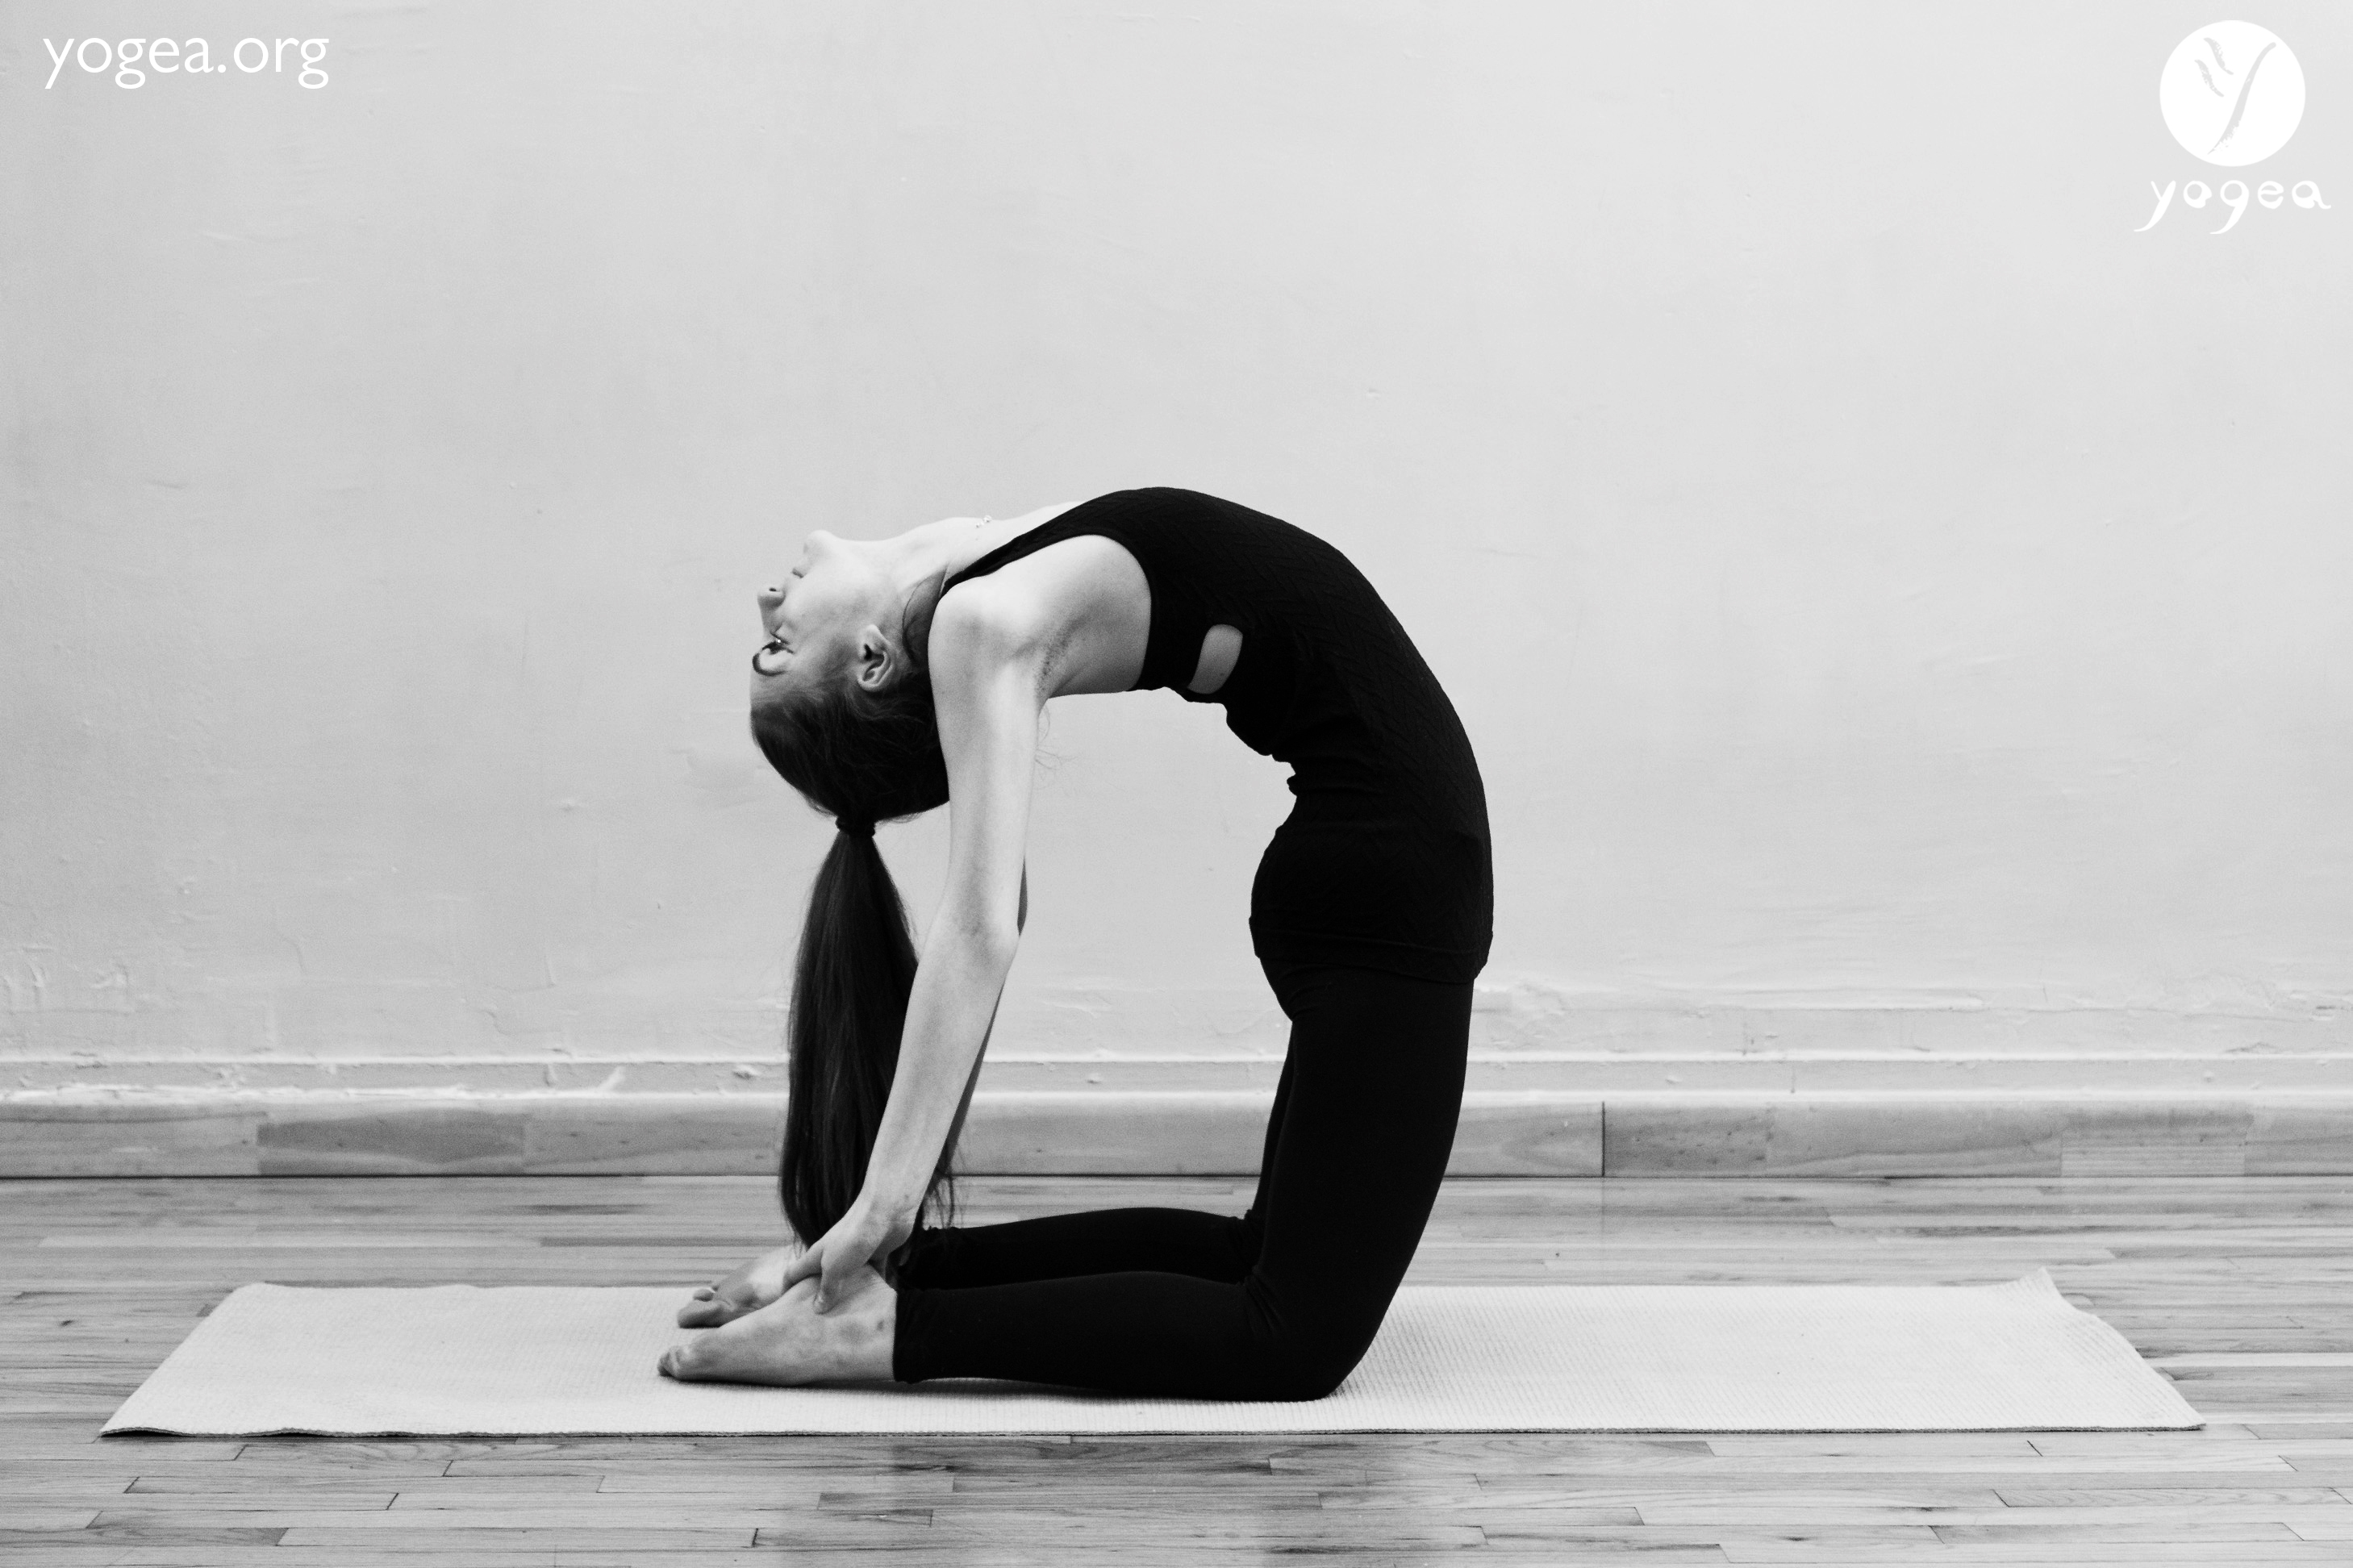 Ojas Yoga and Wellness - In Ustrasana, Ustra means Camel and Asana means  Pose and hence the name Camel Pose. In this beautiful pose, in the final  position the body looks like